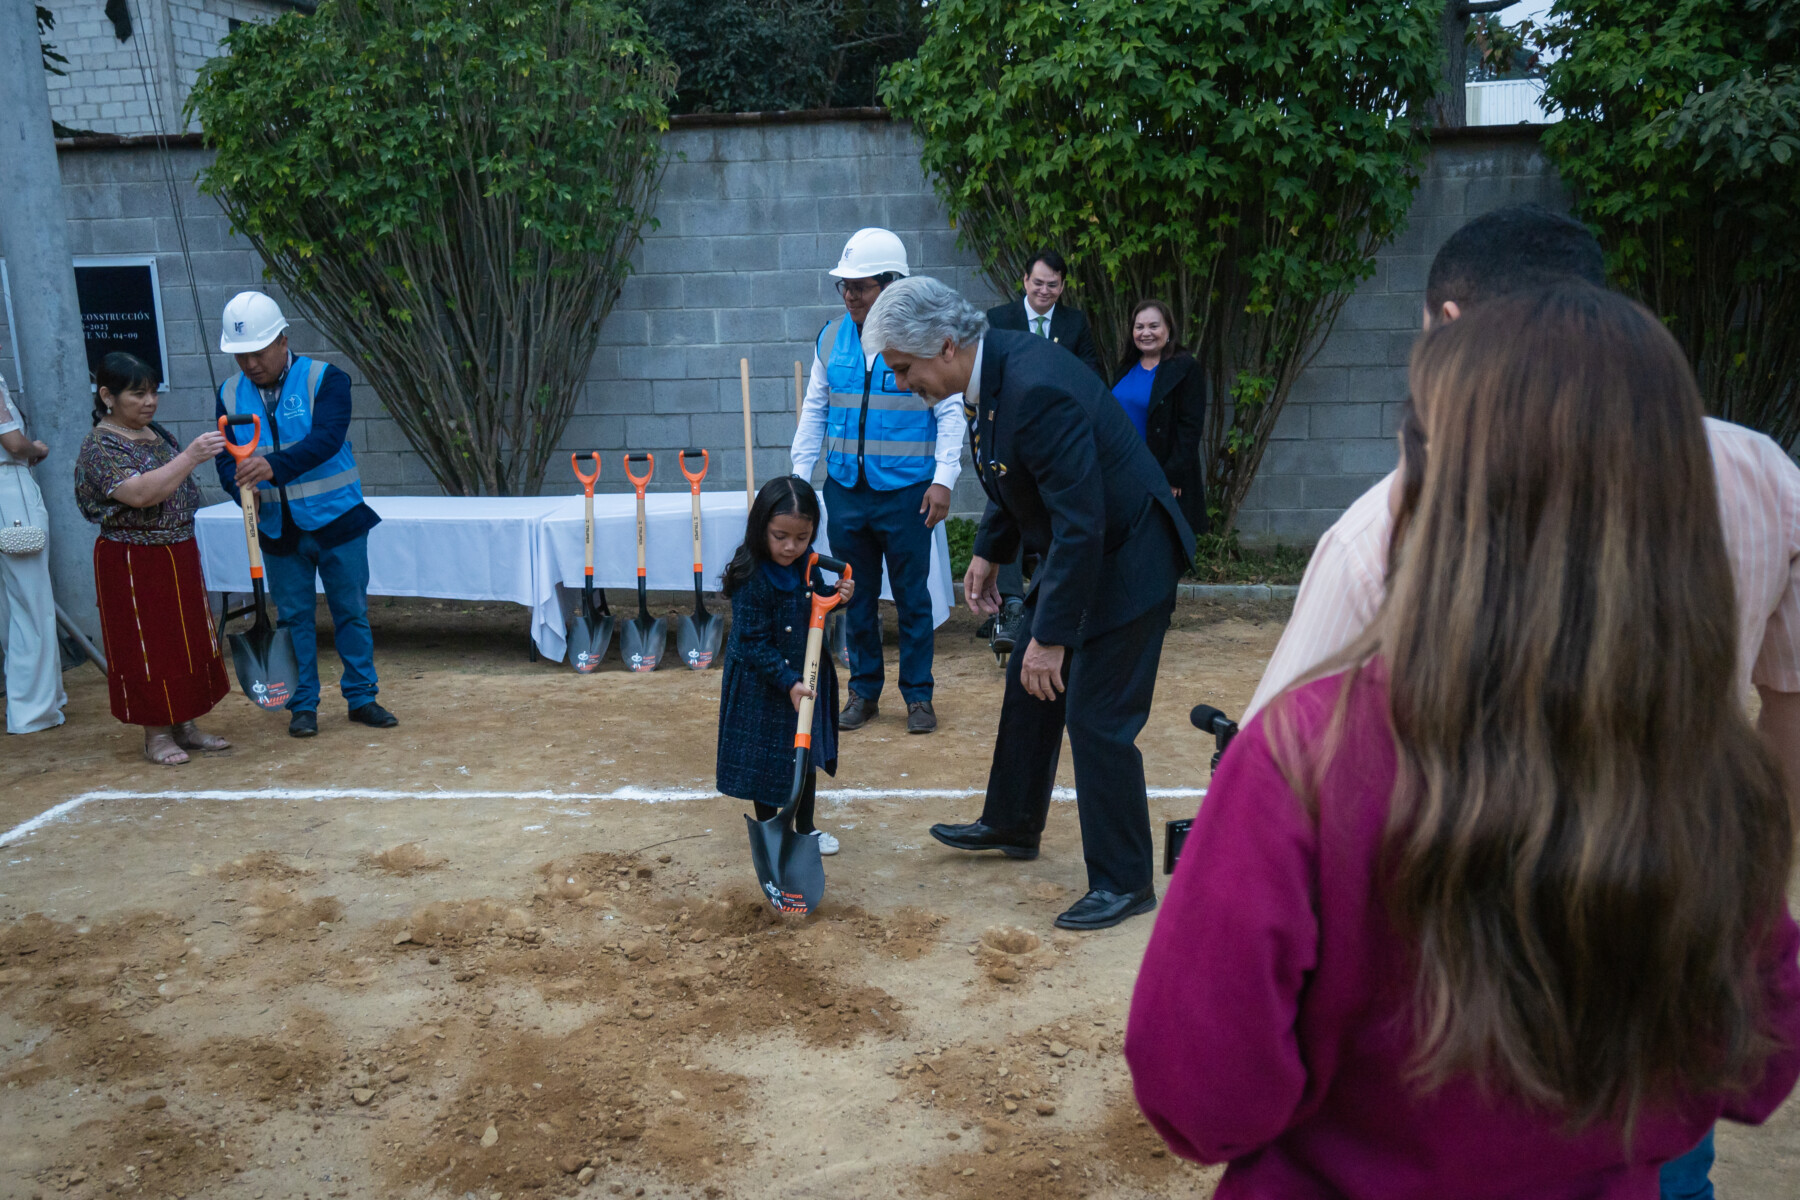 Young girl uses an adult shovel to dig into the ground at the ceremony next to a man in a suit encouraging her.